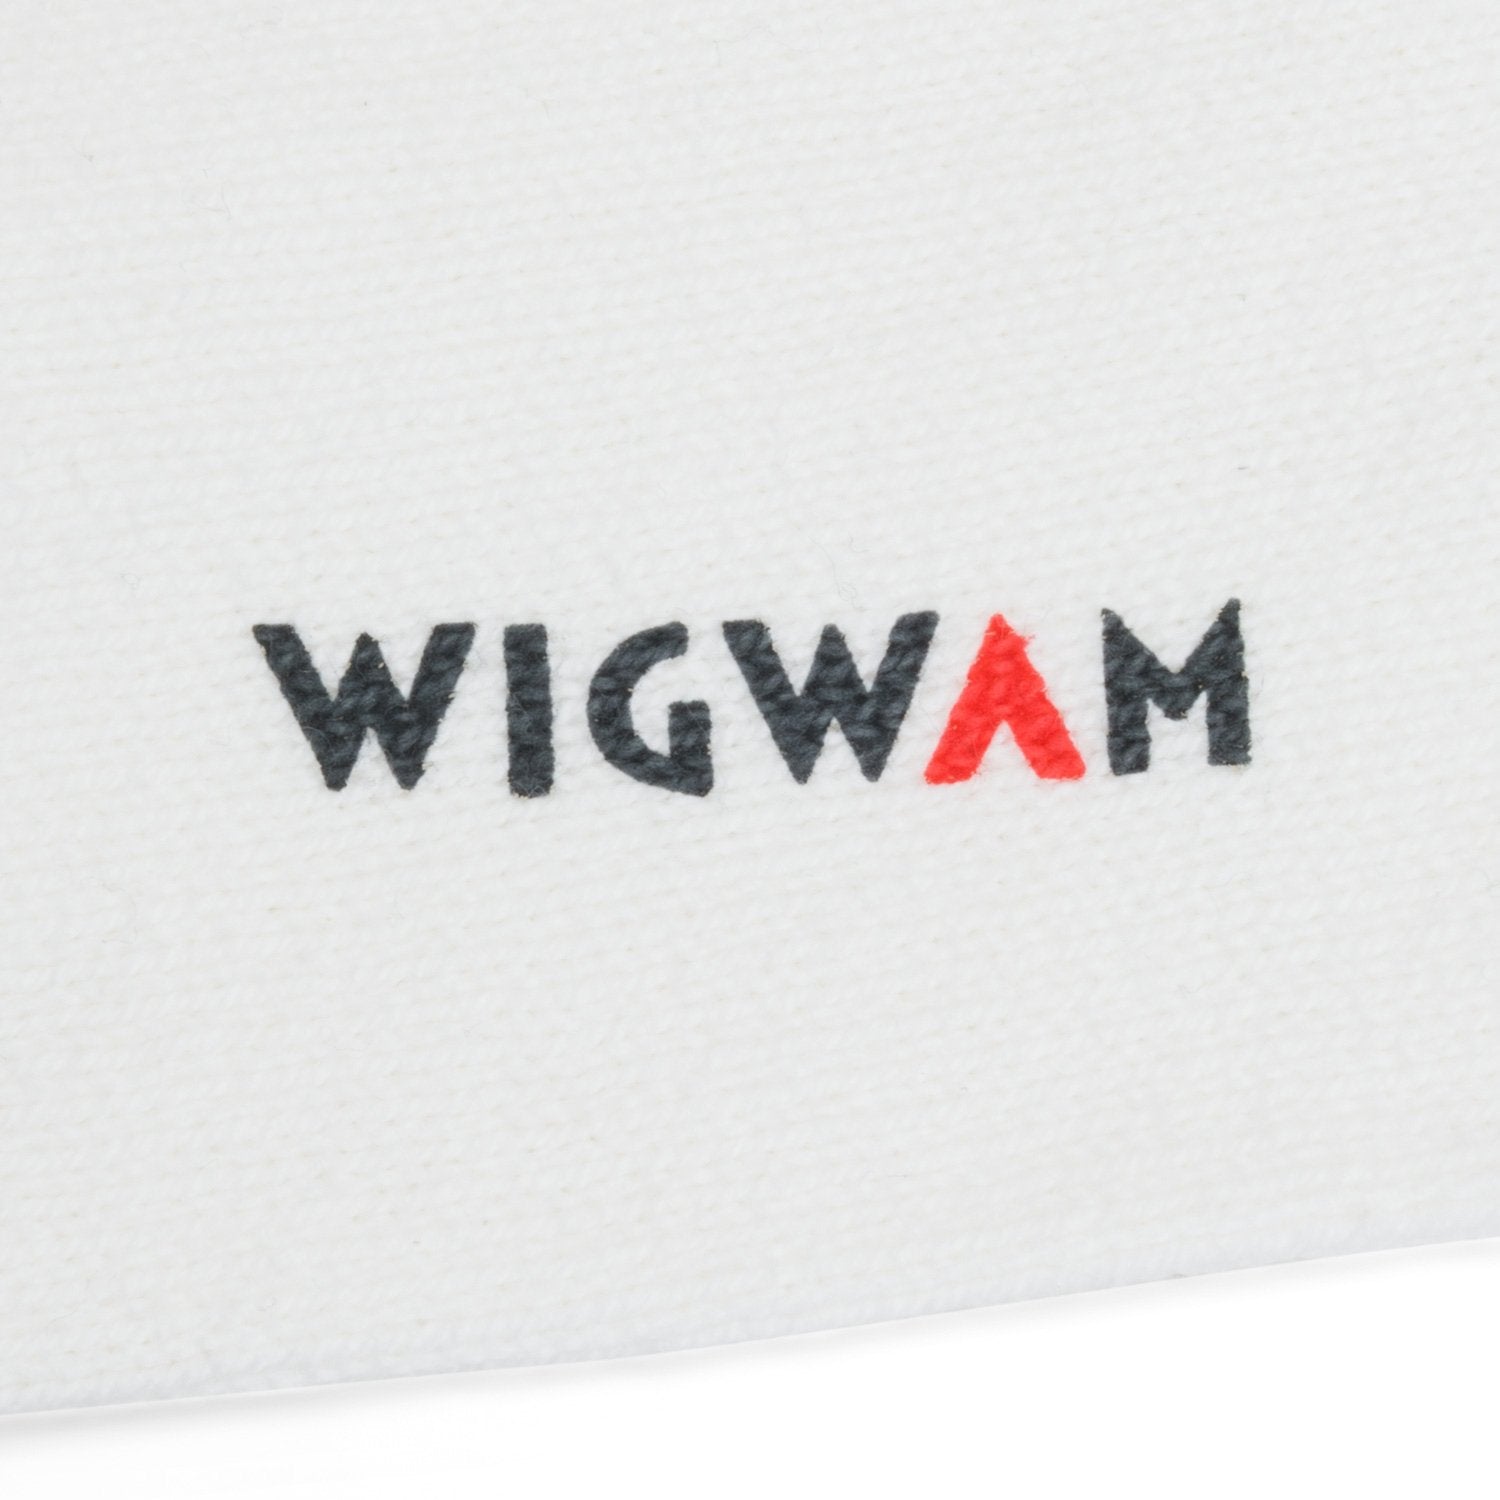 Master Lightweight Cotton Crew Sock - White knit-in logo - made in The USA Wigwam Socks